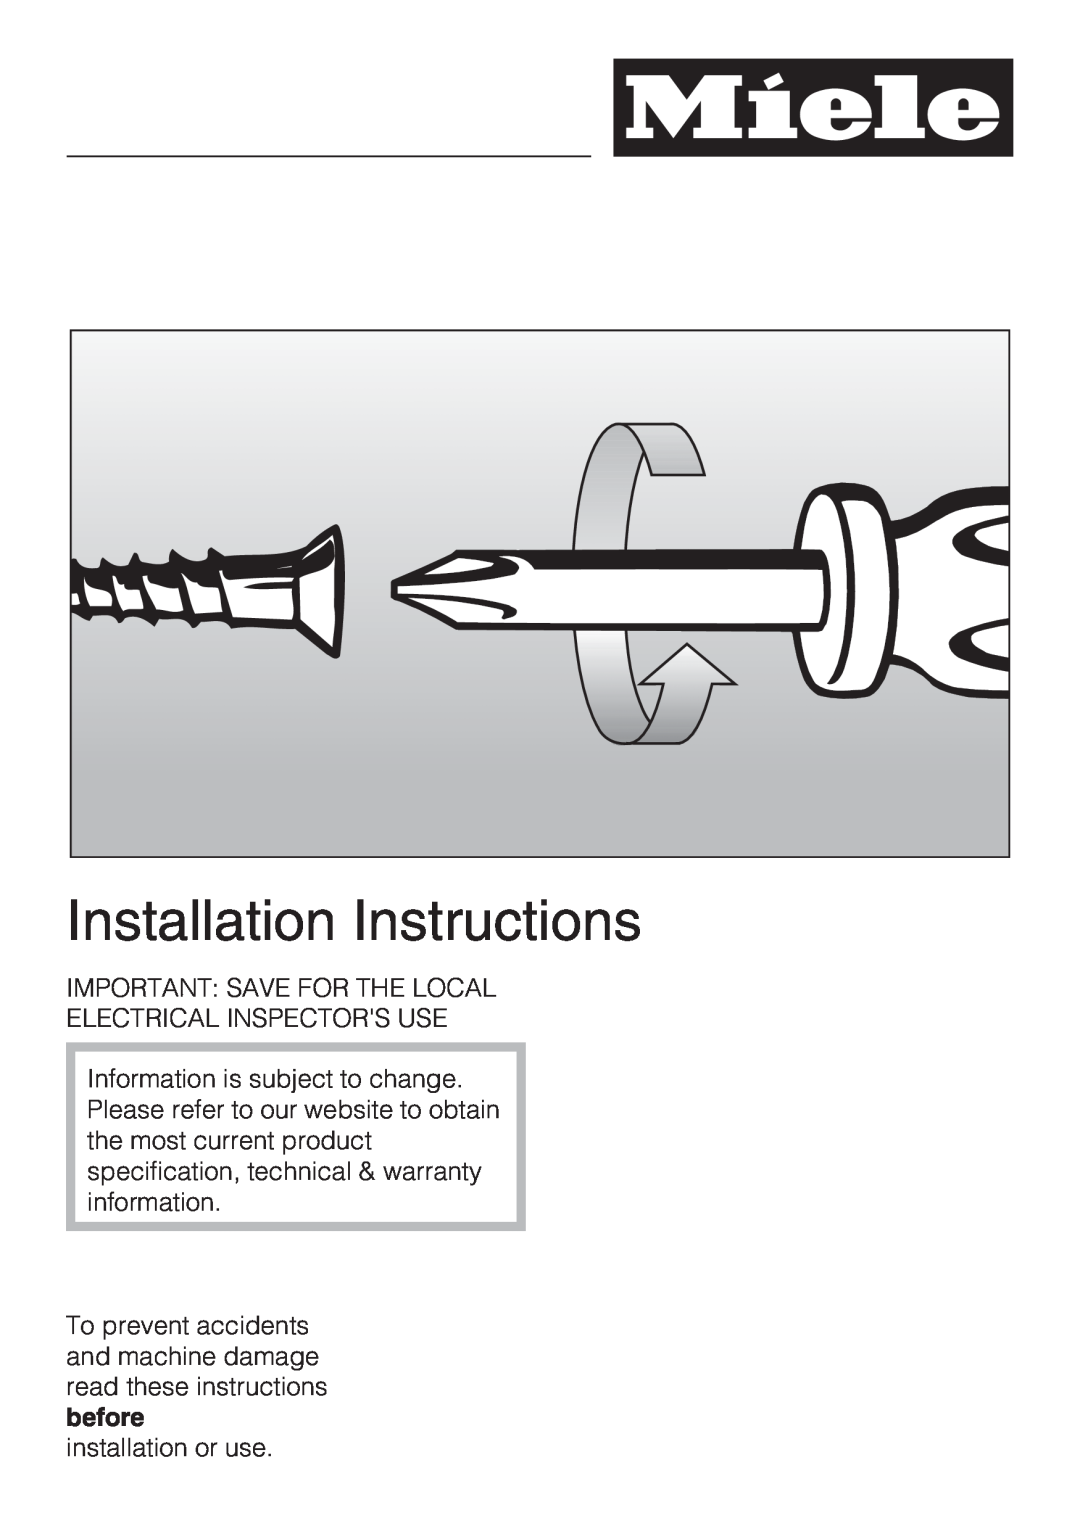 Miele ESW 4088-14 Installation Instructions, Important Save For The Local, Electrical Inspectors Use, installation or use 